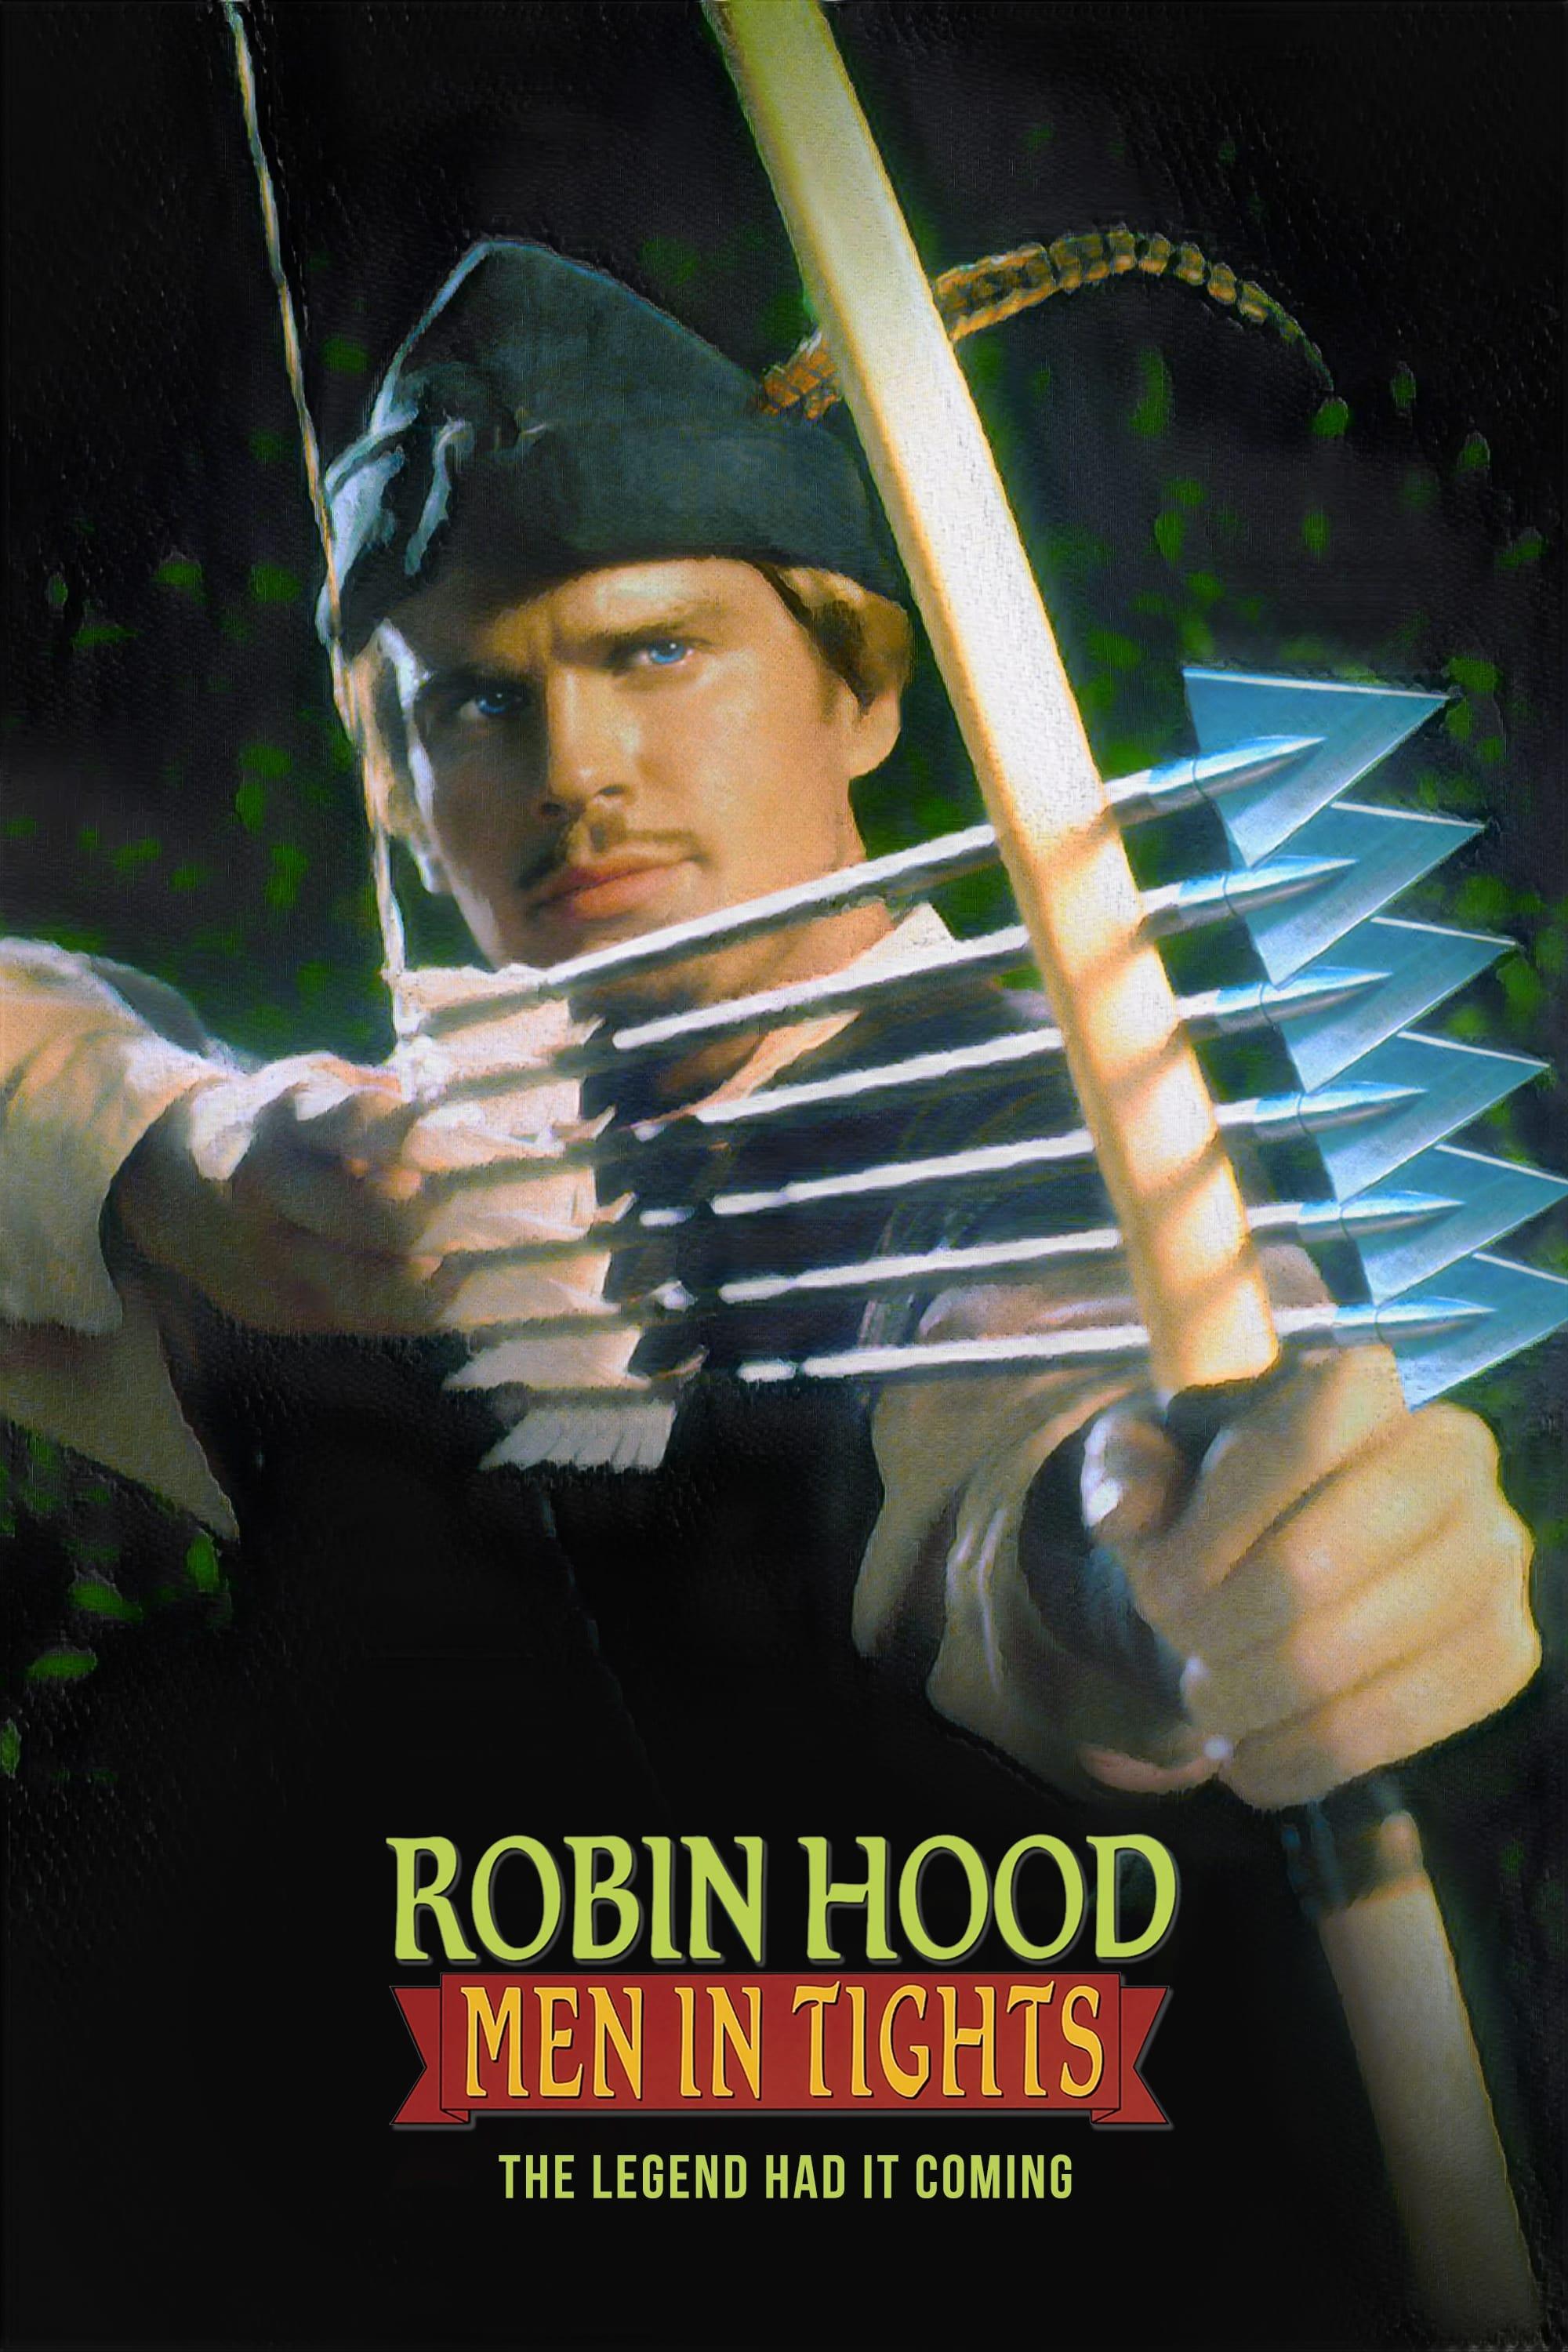 'Robin Hood: Men in Tights' – The Legend Had It Coming poster